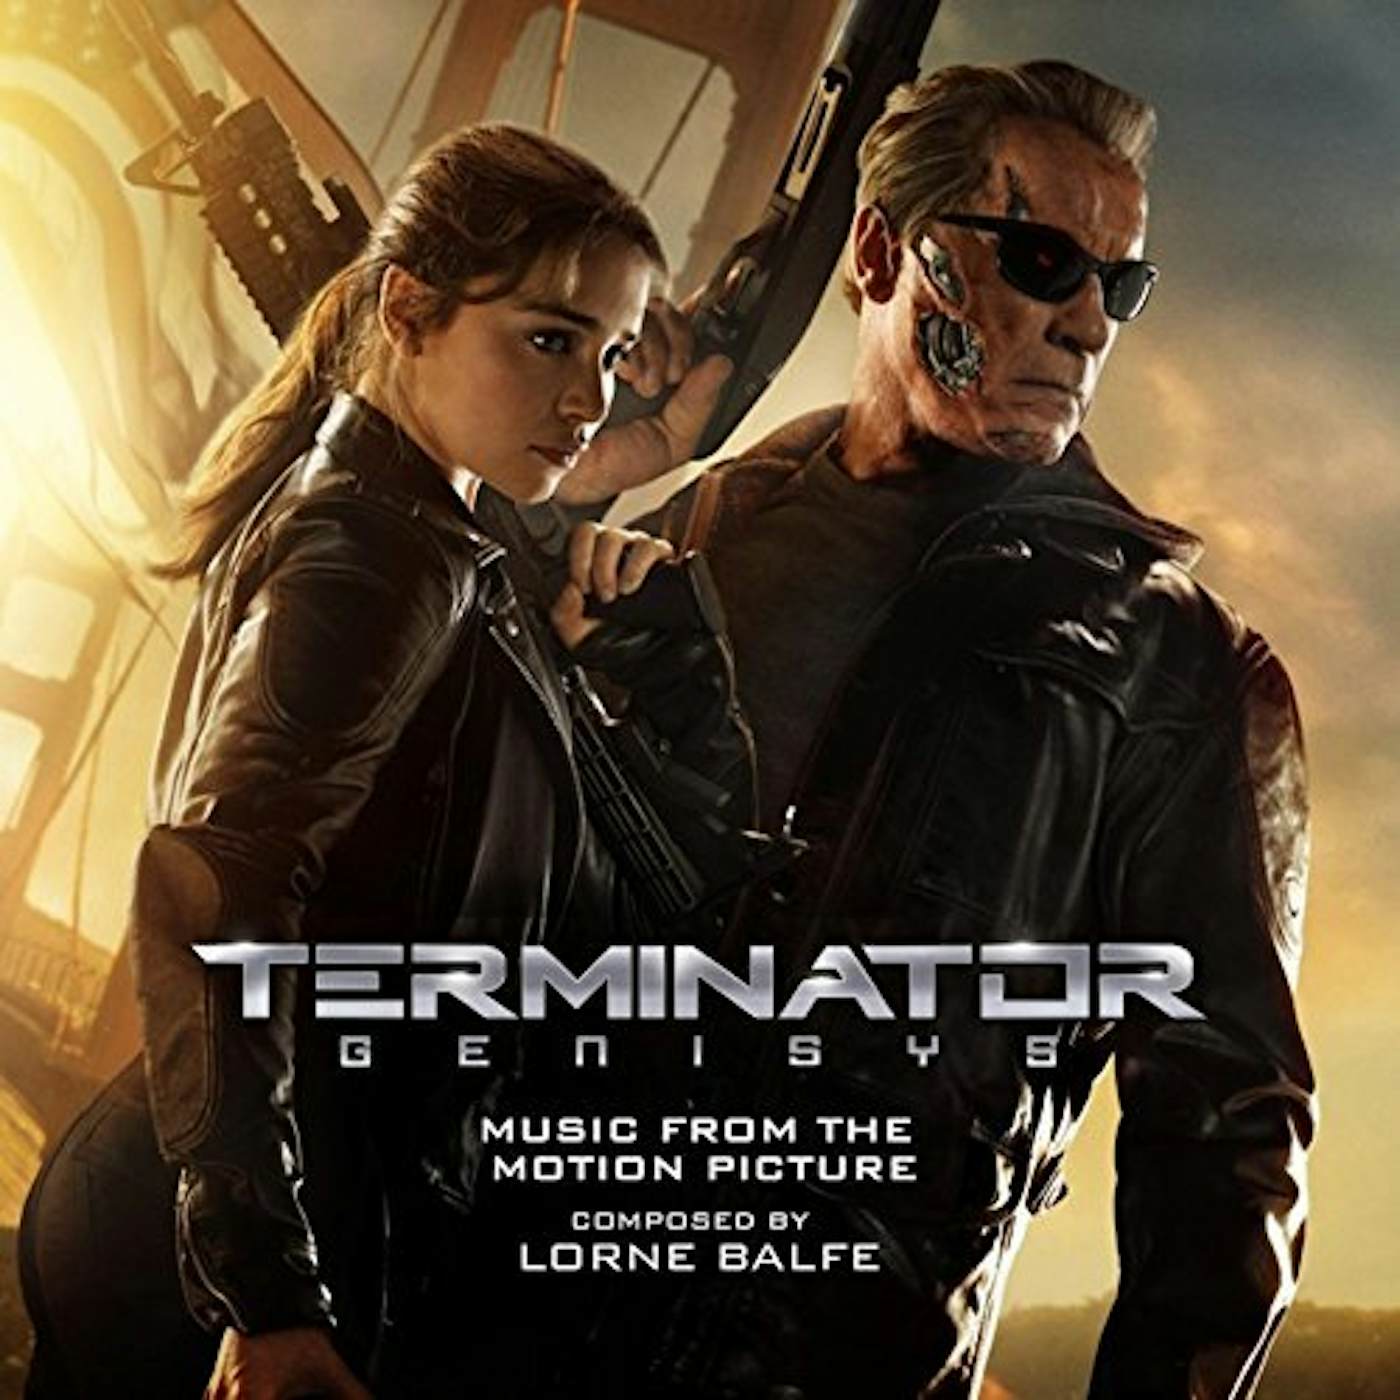 Lorne Balfe TERMINATOR GENISYS - MUSIC FROM THE MOTION PICTURE CD